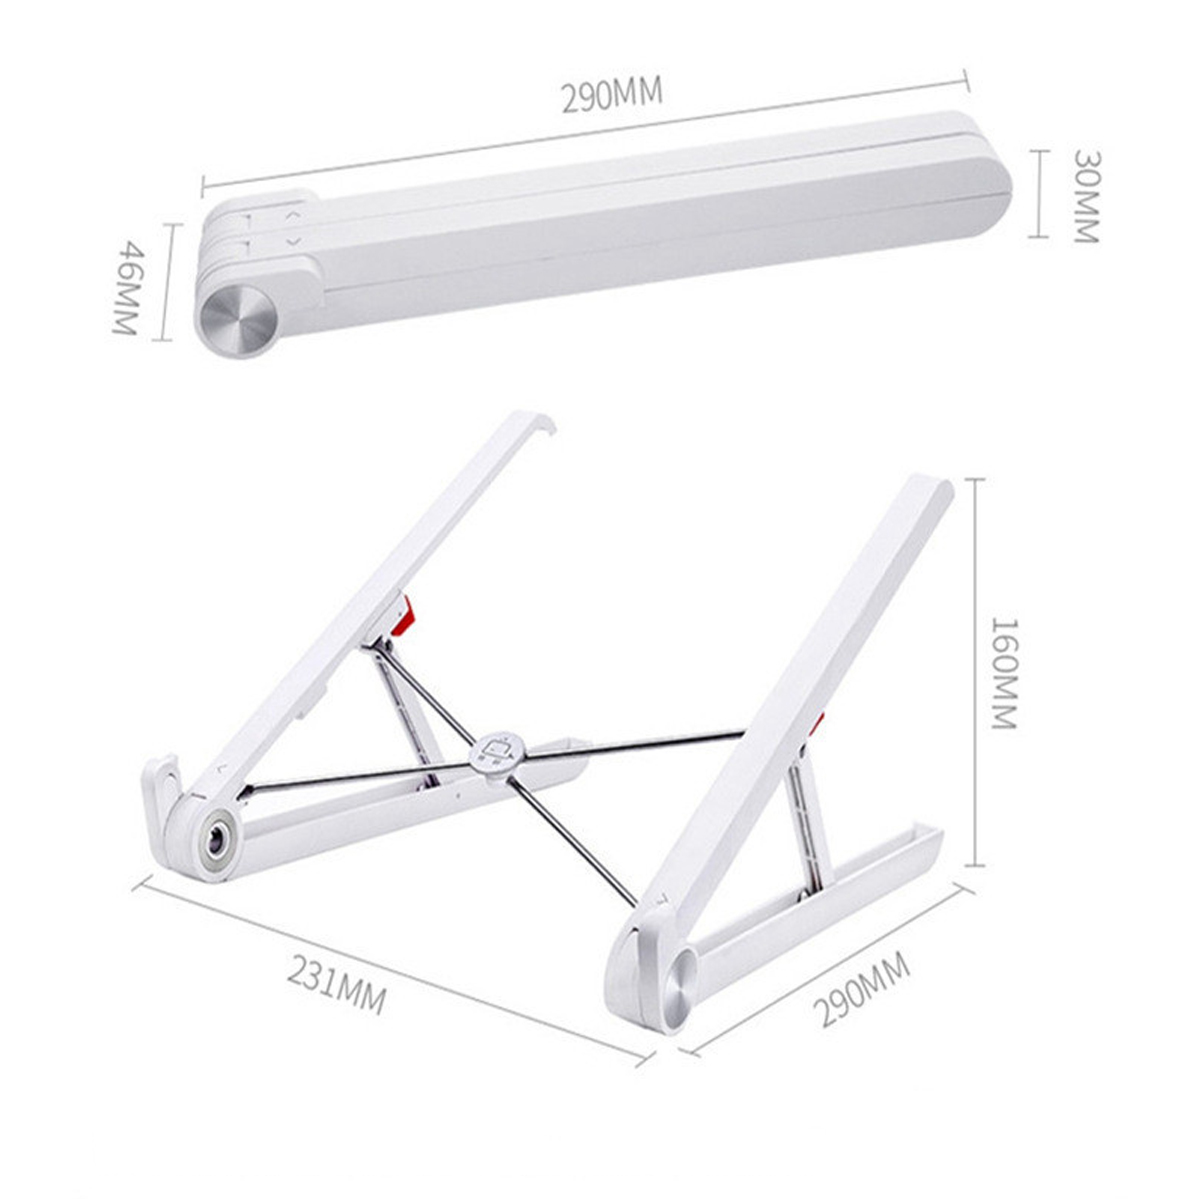 Portable Desktop Foldable Height Adjustable Notebook Stand Heat Dissipation For Notebook MacBook 11.0-17.0 Inches